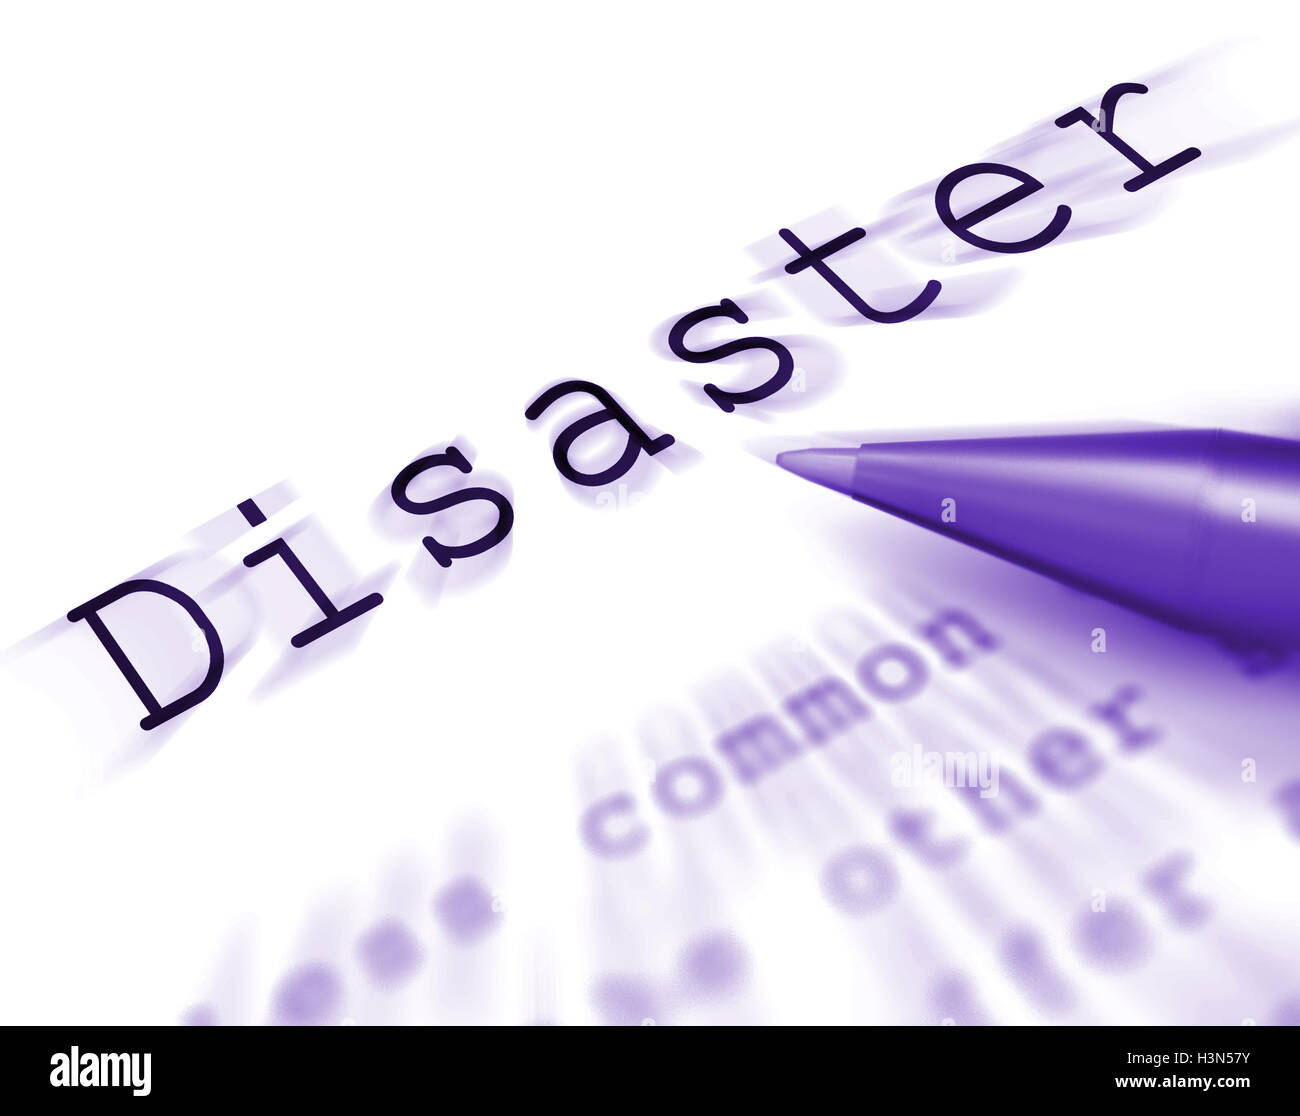 Disaster Word Displays Emergency Calamity And Crisis Stock Photo